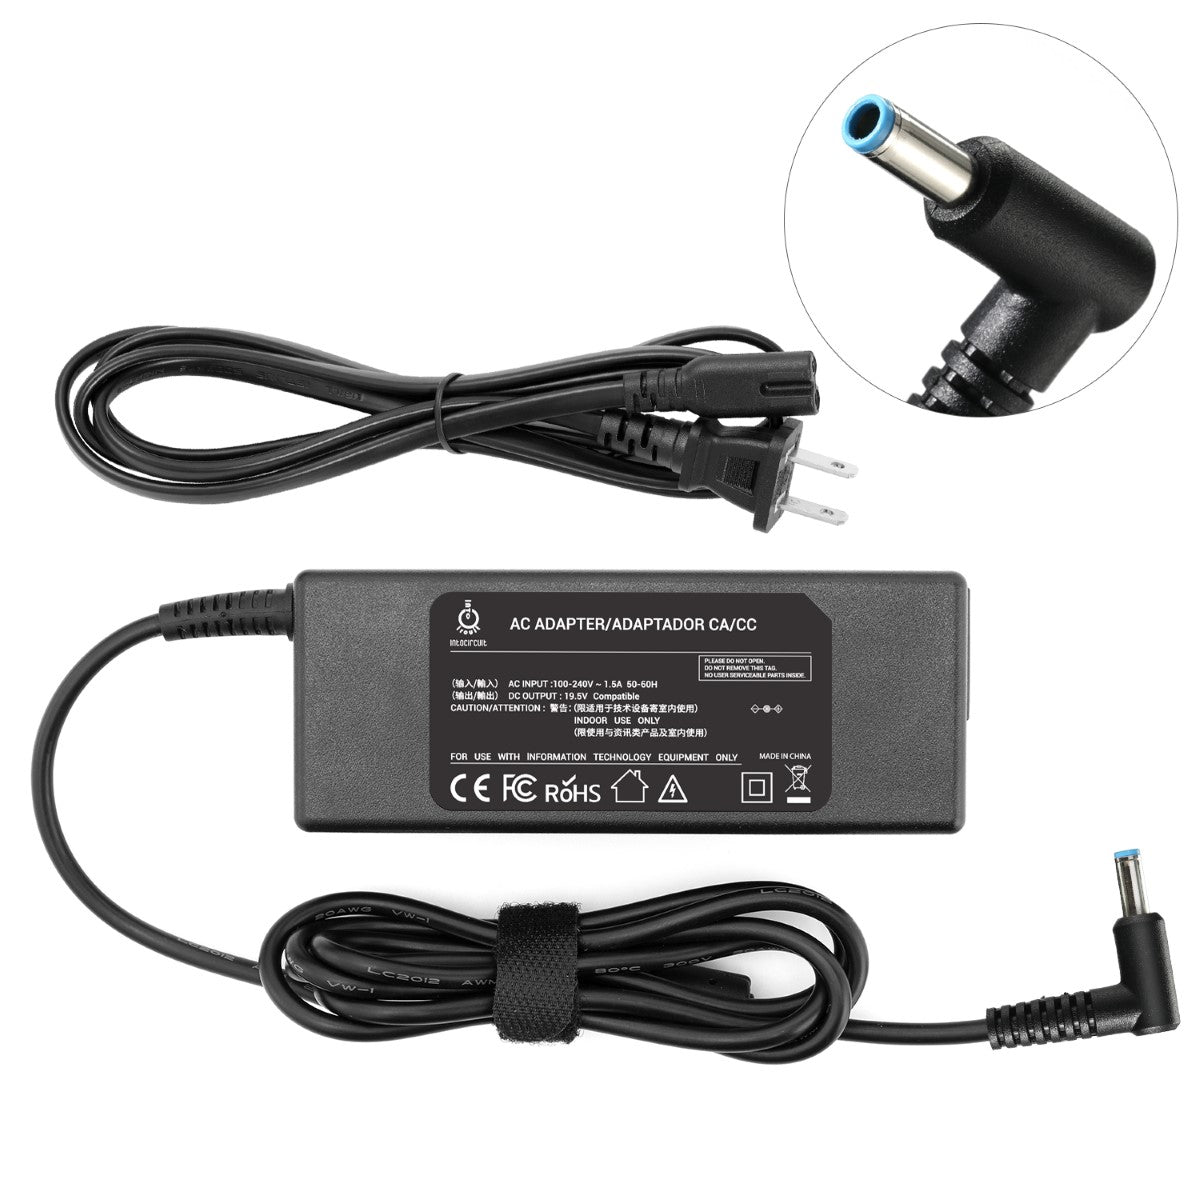 Charger for HP Spectre 13-4101dx x360 Laptop